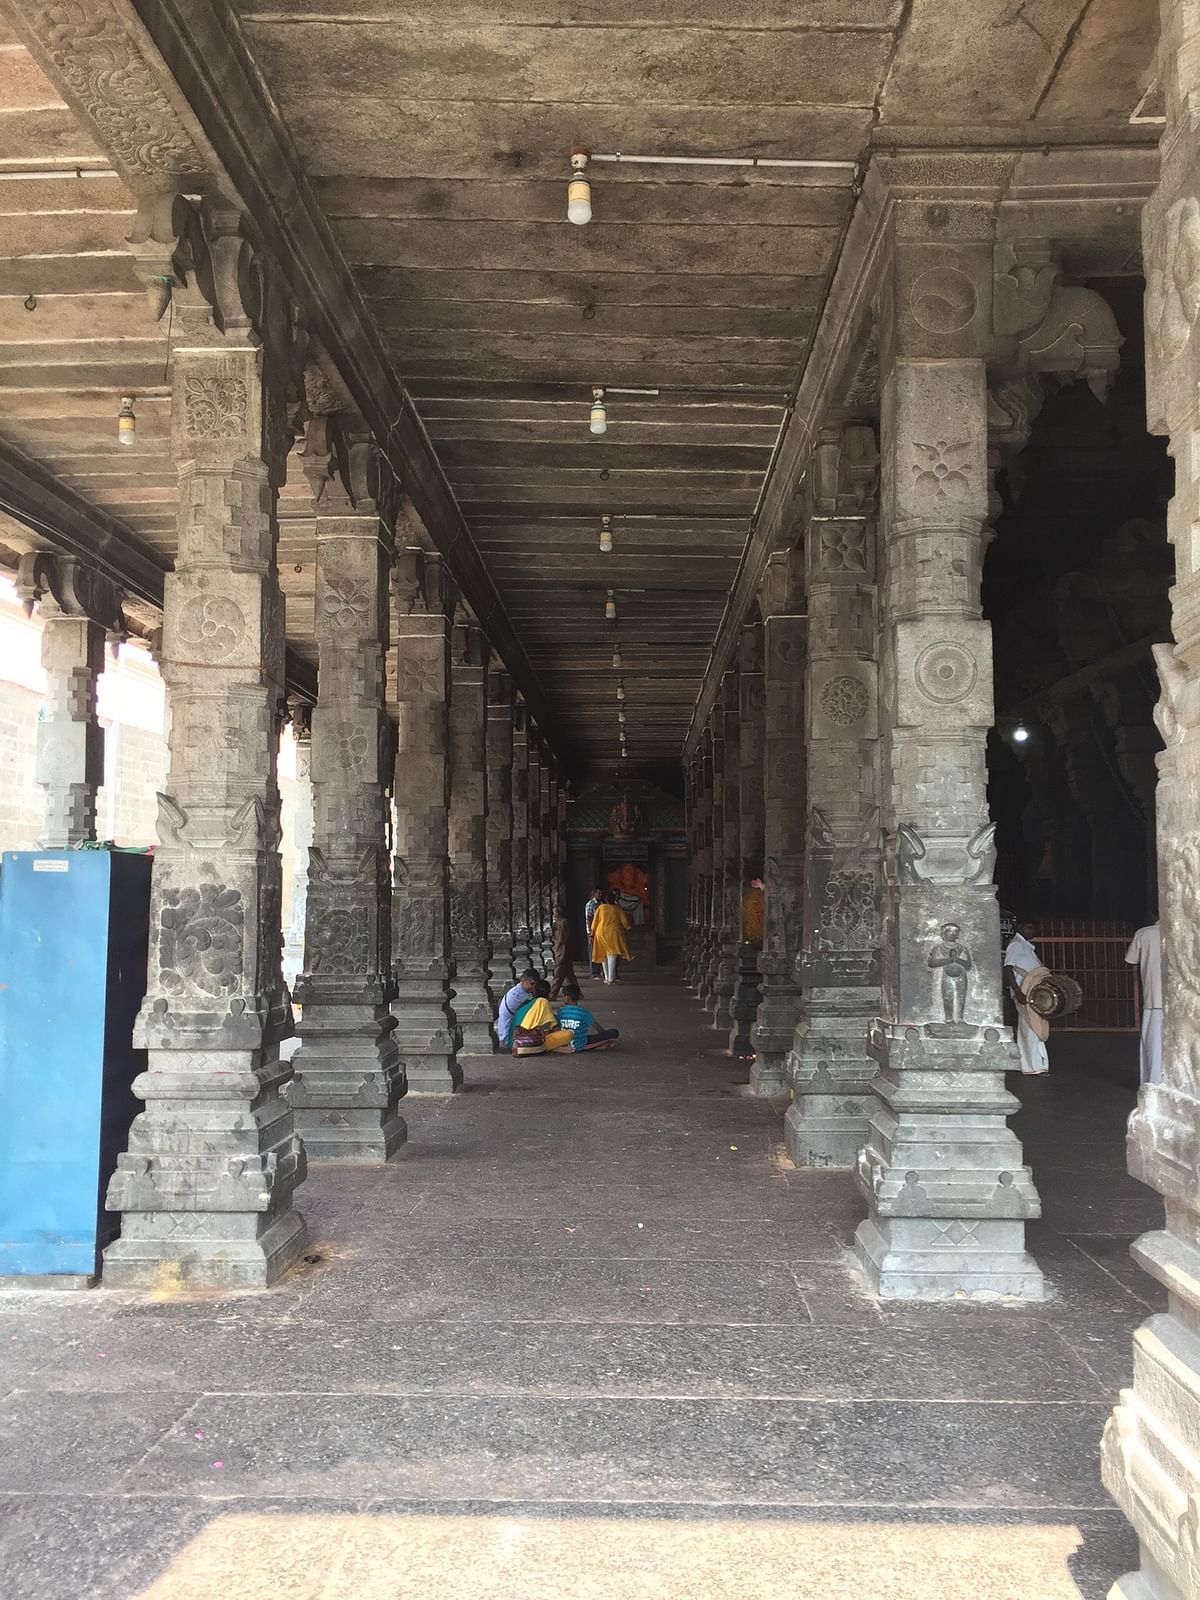 View of the 1,000-pillared hall